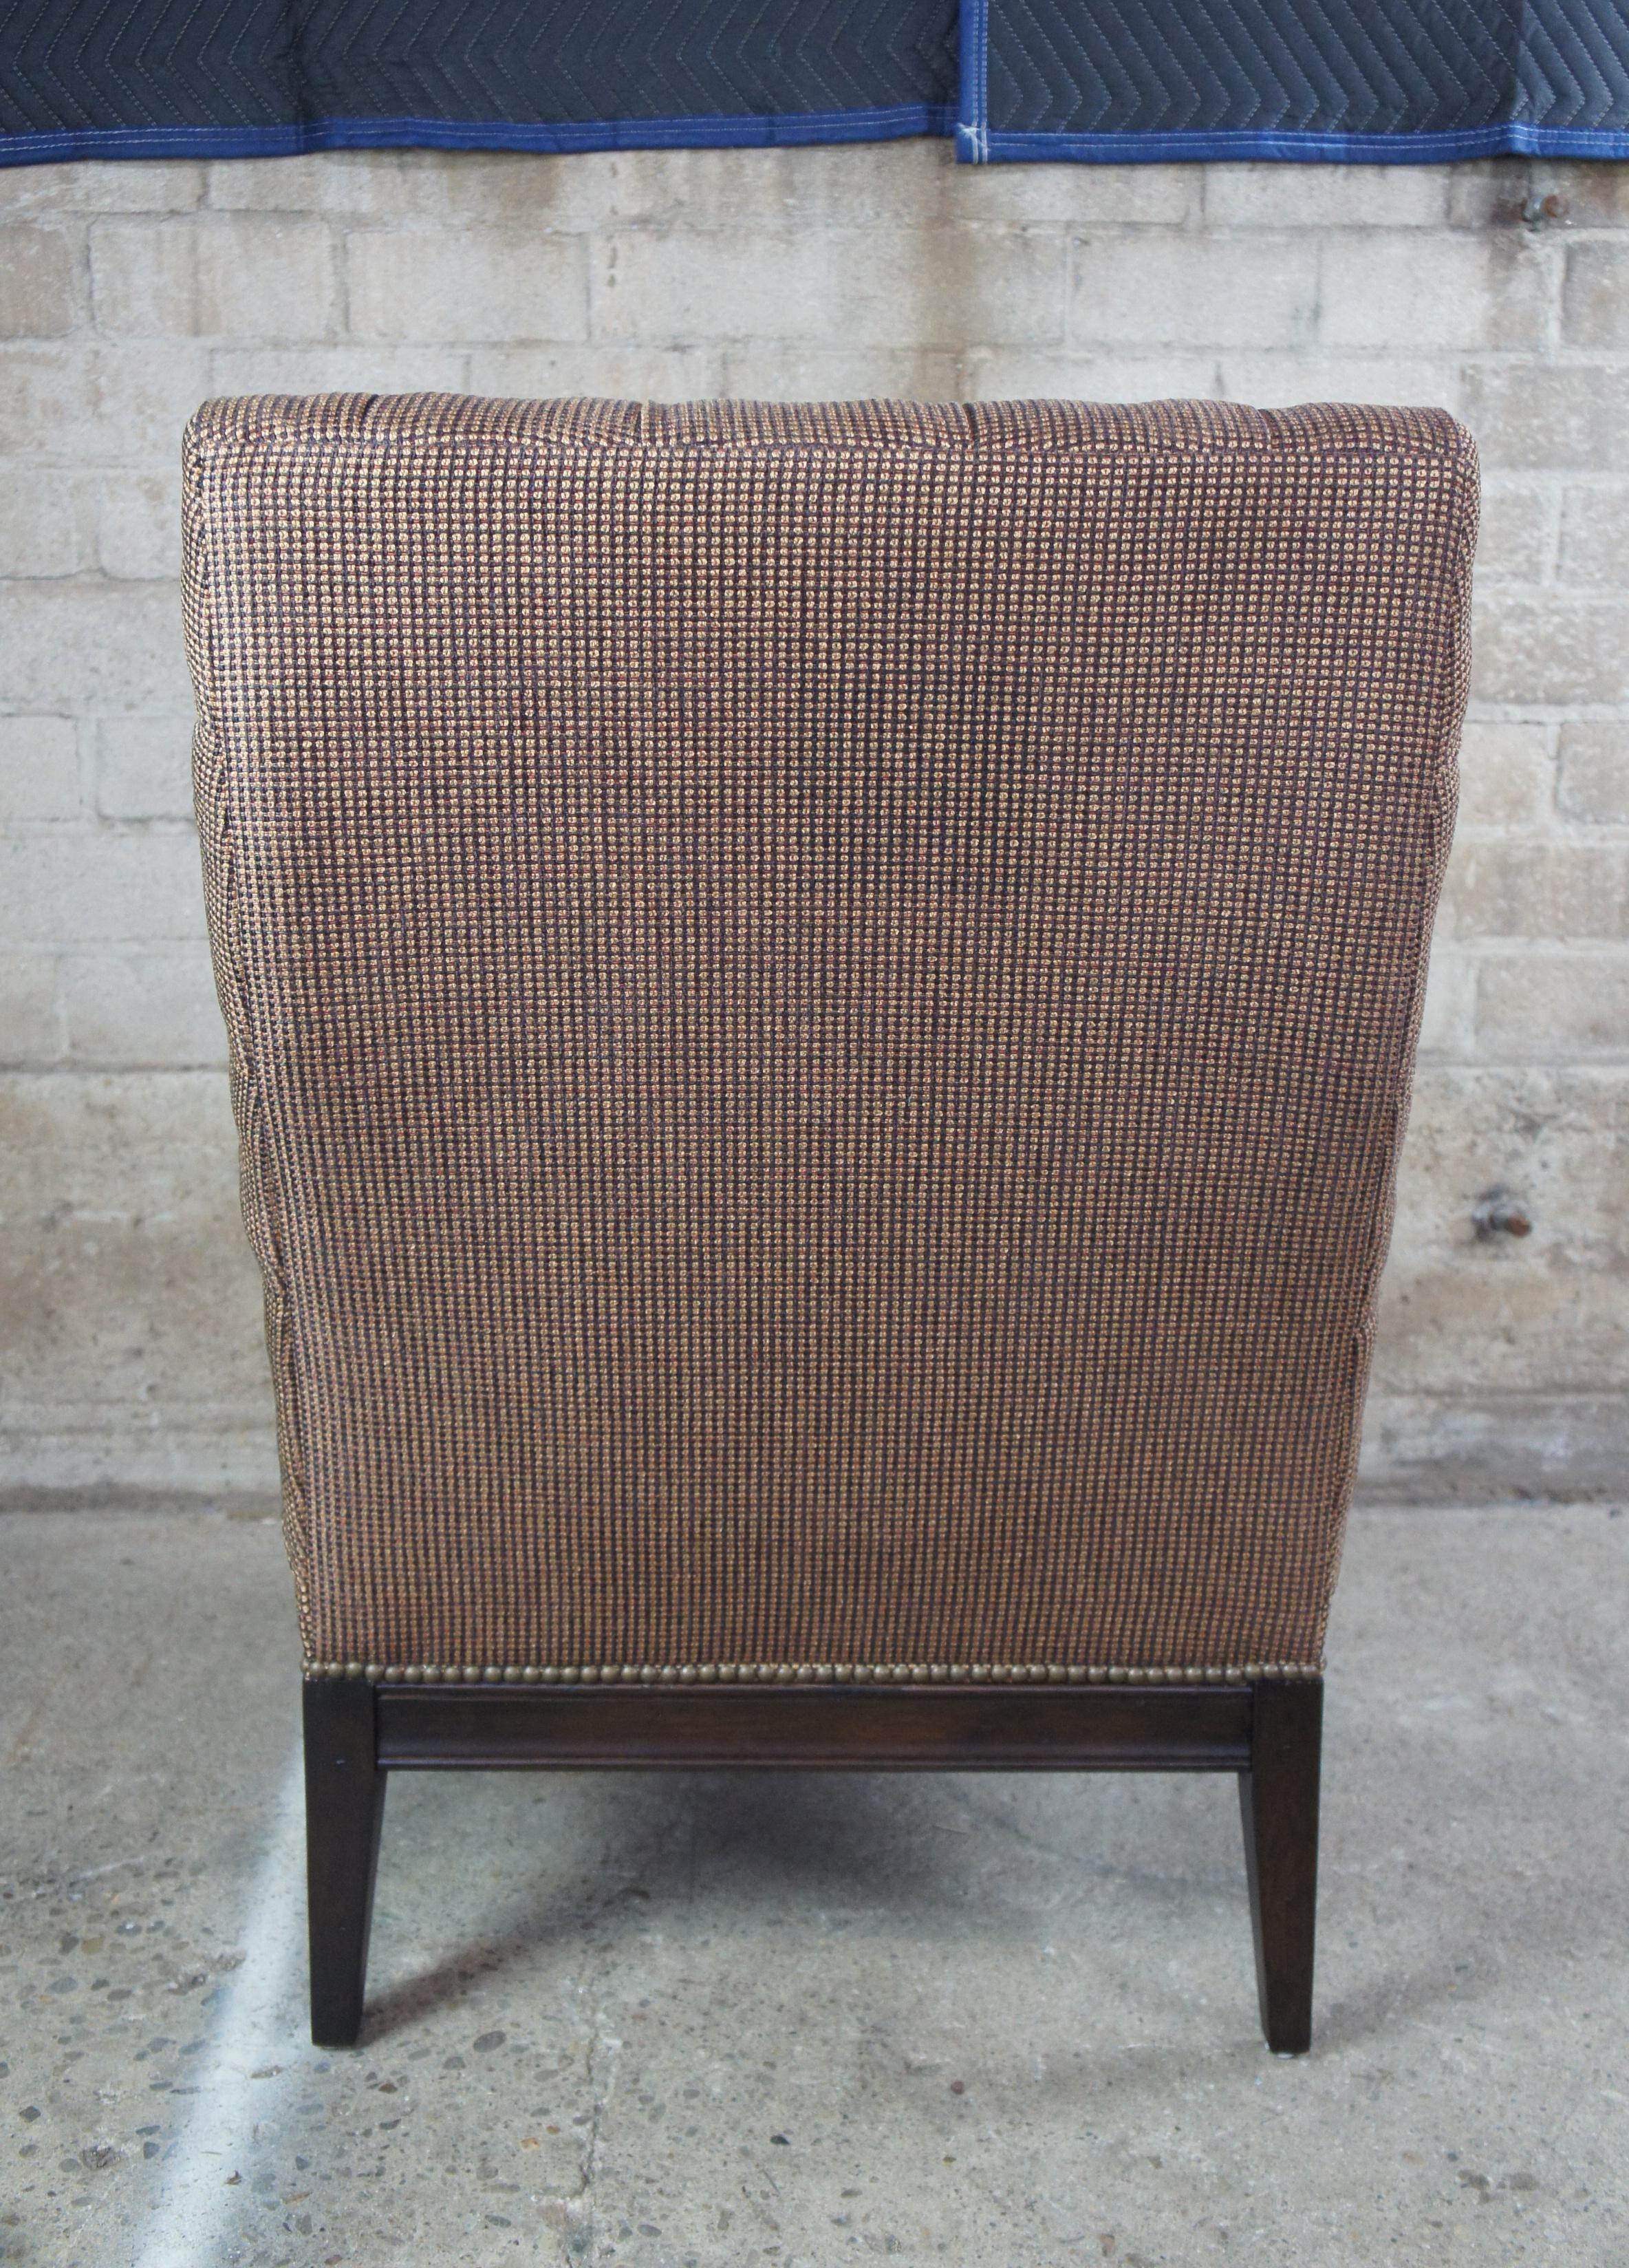 20th Century Henredon French Tufted Tweed and Nailhead Slipper Java Lounge Chair and Ottoman